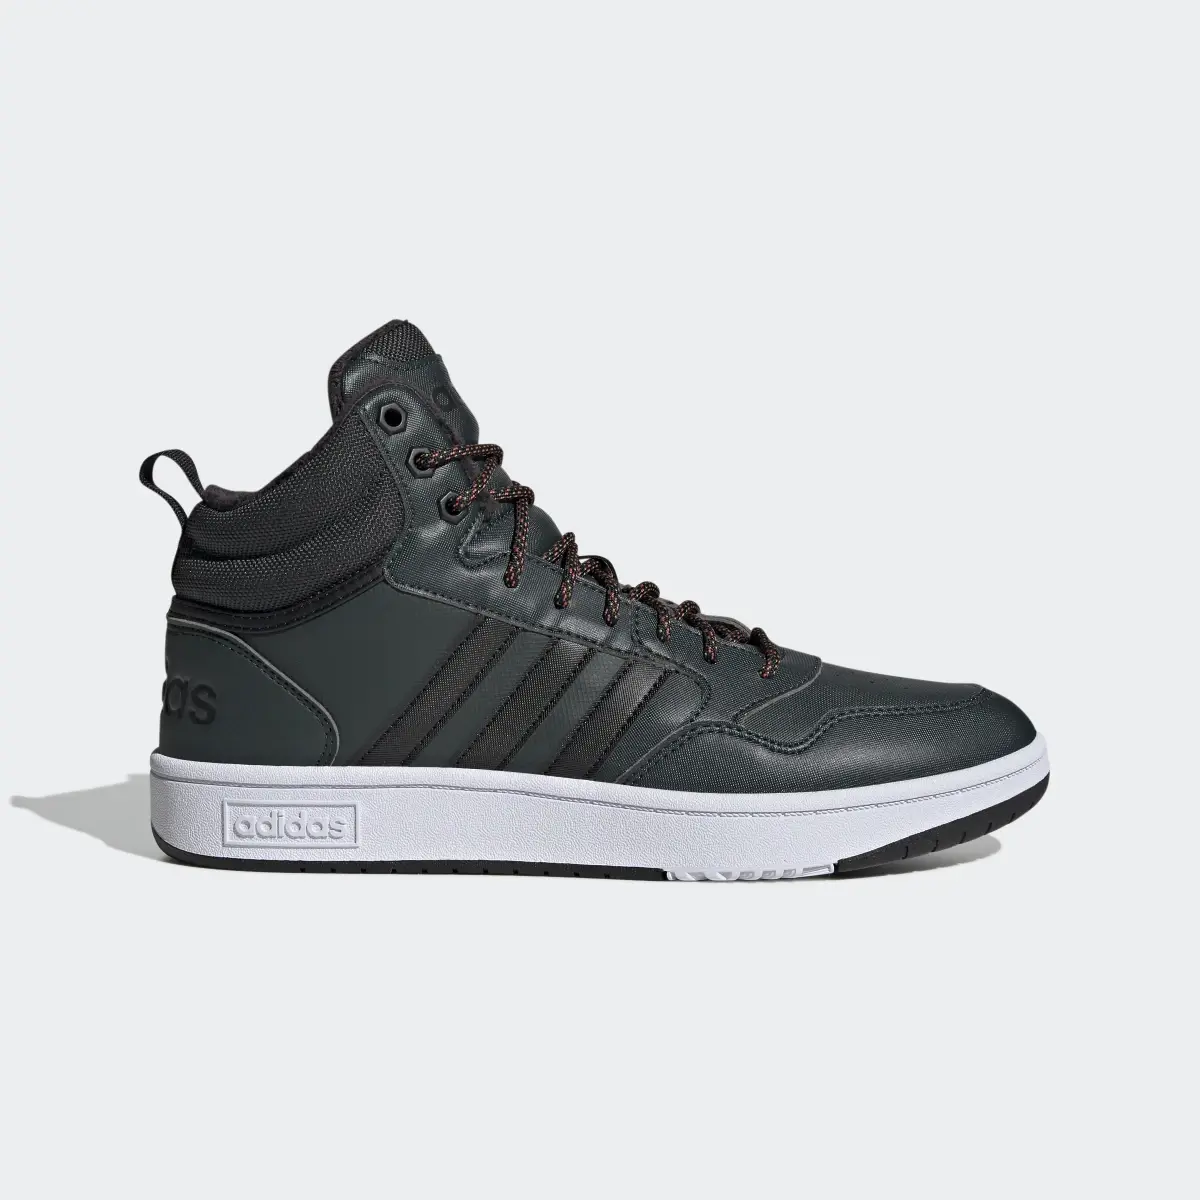 Adidas Chaussure Hoops 3.0 Mid Lifestyle Basketball Classic Fur Lining Winterized. 2